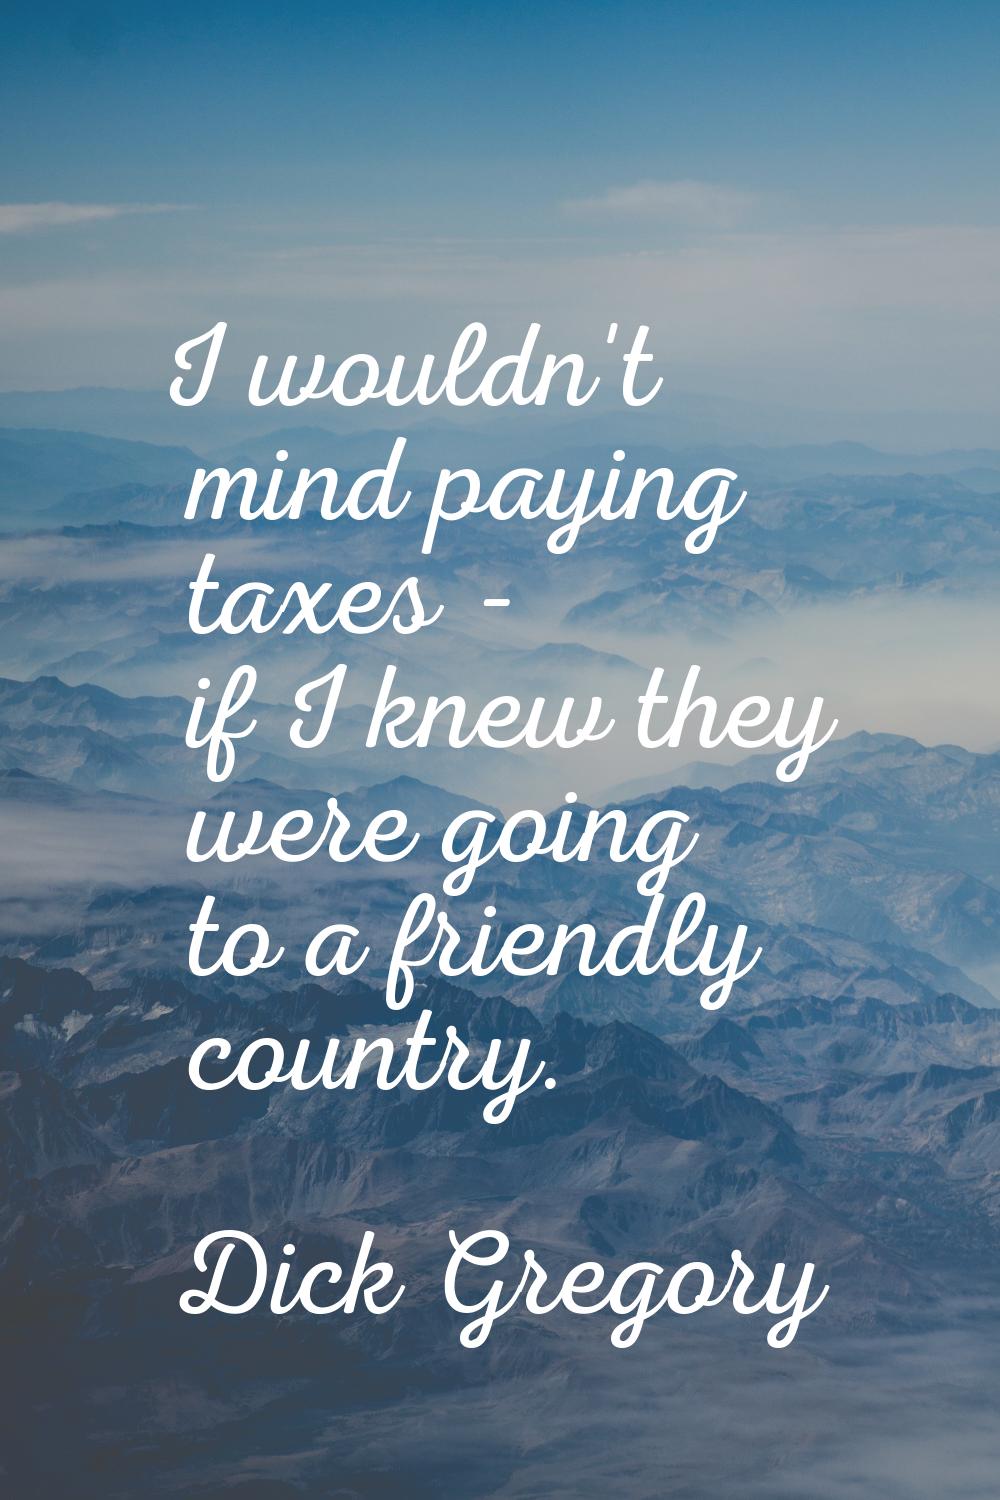 I wouldn't mind paying taxes - if I knew they were going to a friendly country.